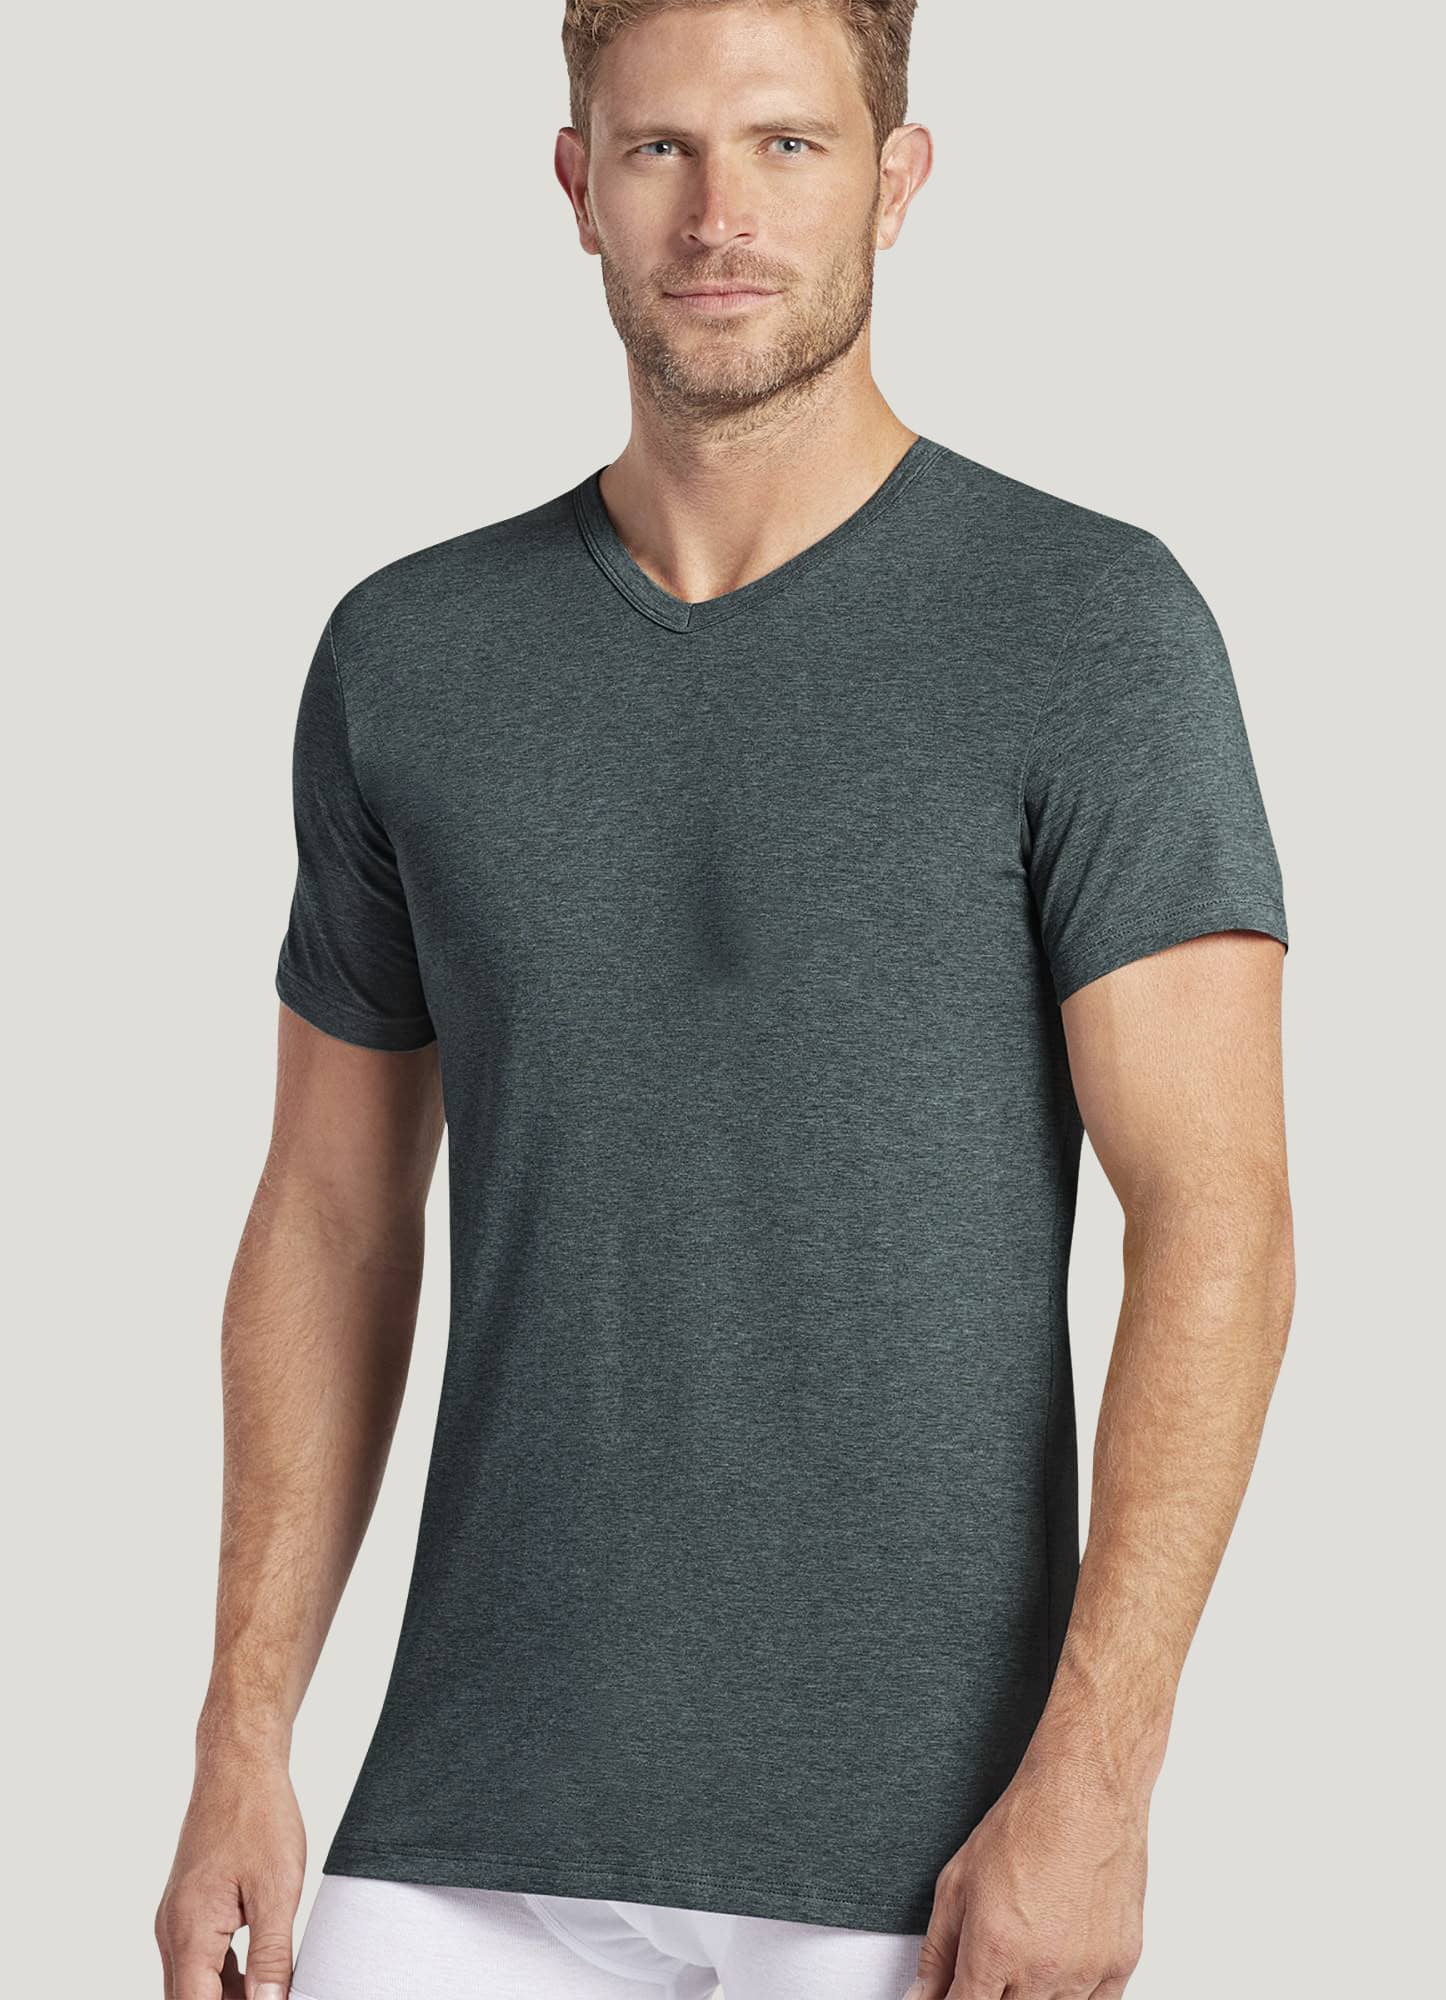 Mens Deep V-Neck Shirts Low Cut Stretch Basic Cotton Top Athletic Muscle  T-Shirt